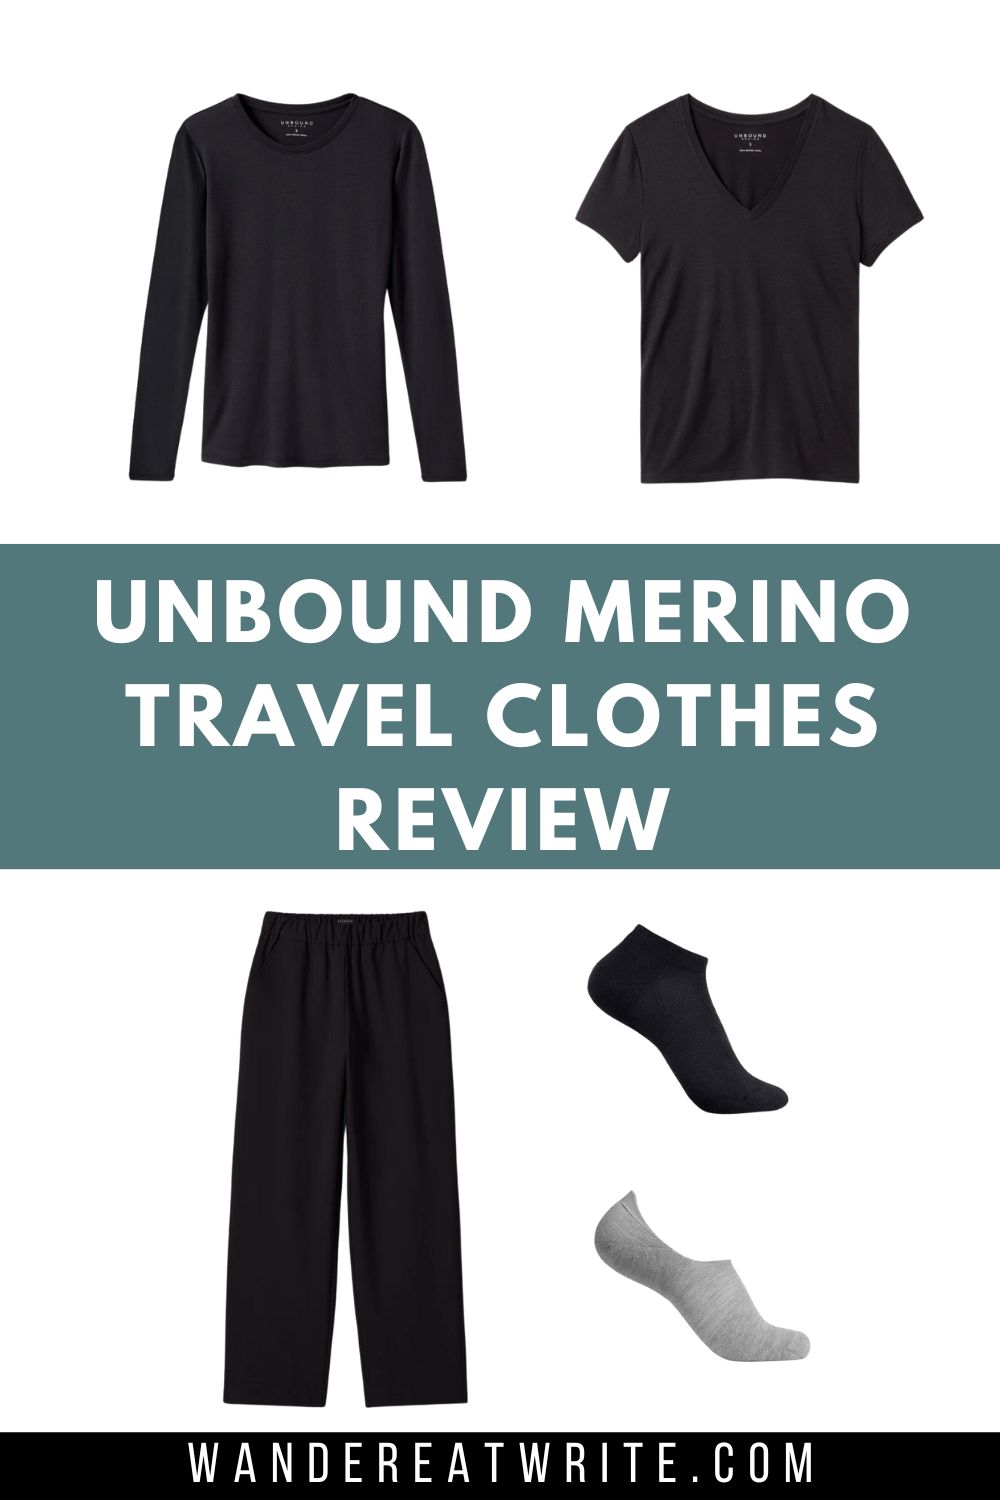 Photo collage title: Unbound Merino Travel Clothes Review. Photos on top row: a black women's long sleeve crew shirt and a black women's v-neck t-shirt. Photos on the bottom row: women's lightweight travel pants in black, ankle socks in black, and no-show socks in gray